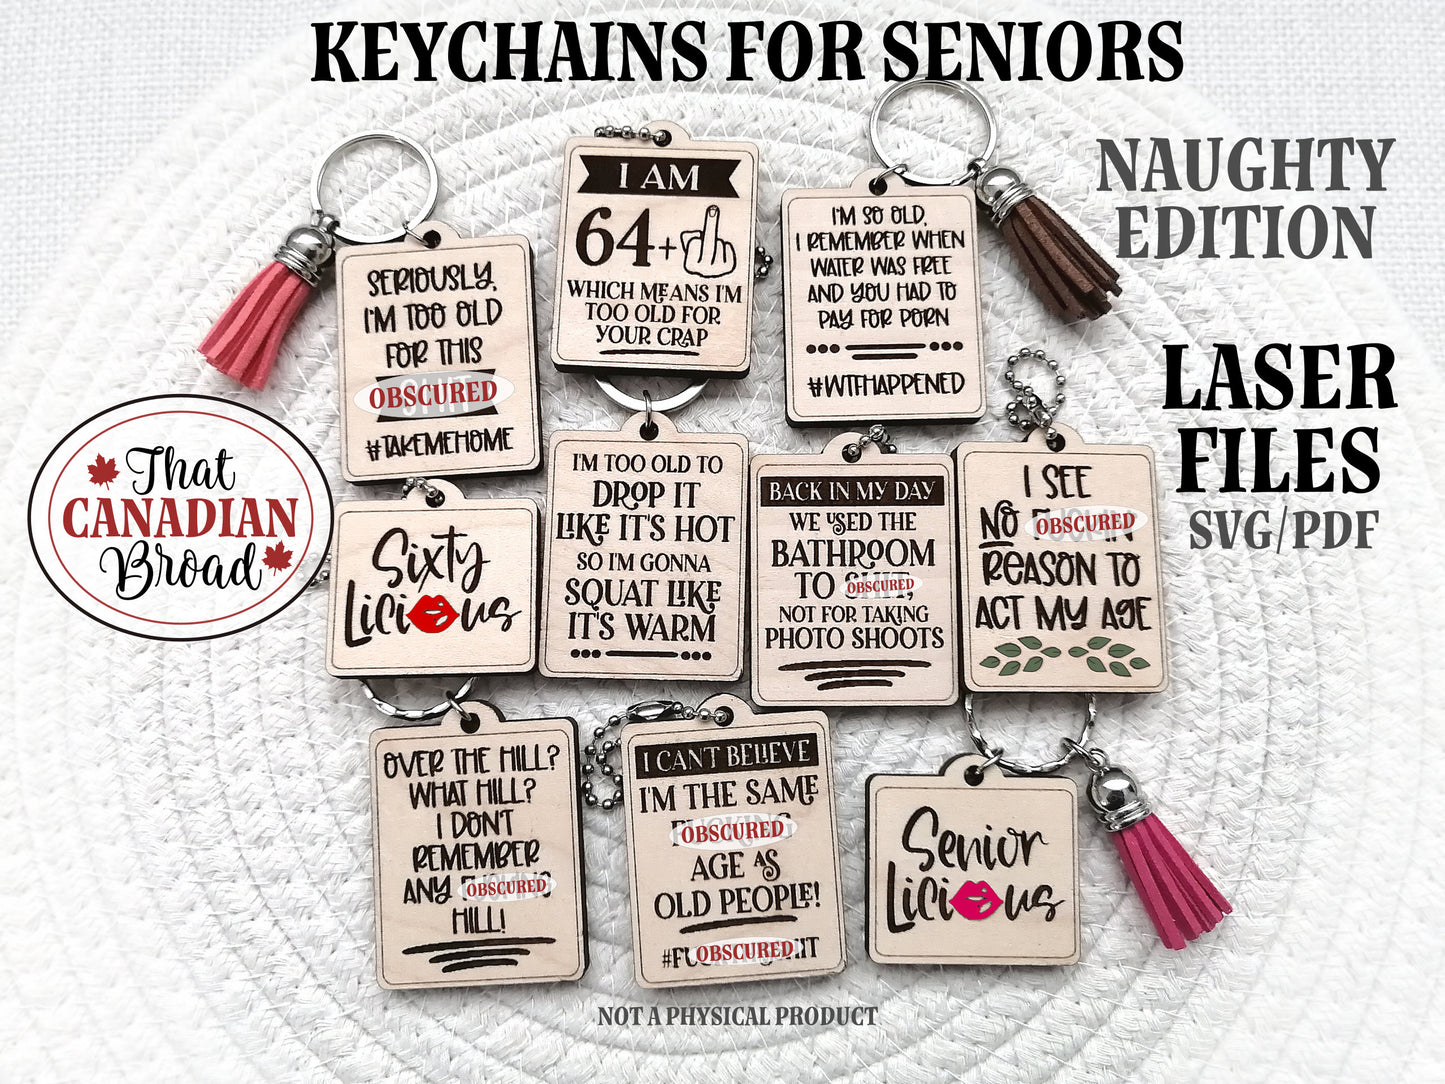 Keychains For Seniors Naughty Edition, 10 designs, Inappropriate, senior humor, senior humour, funny keychains, laser file, SVG PDF